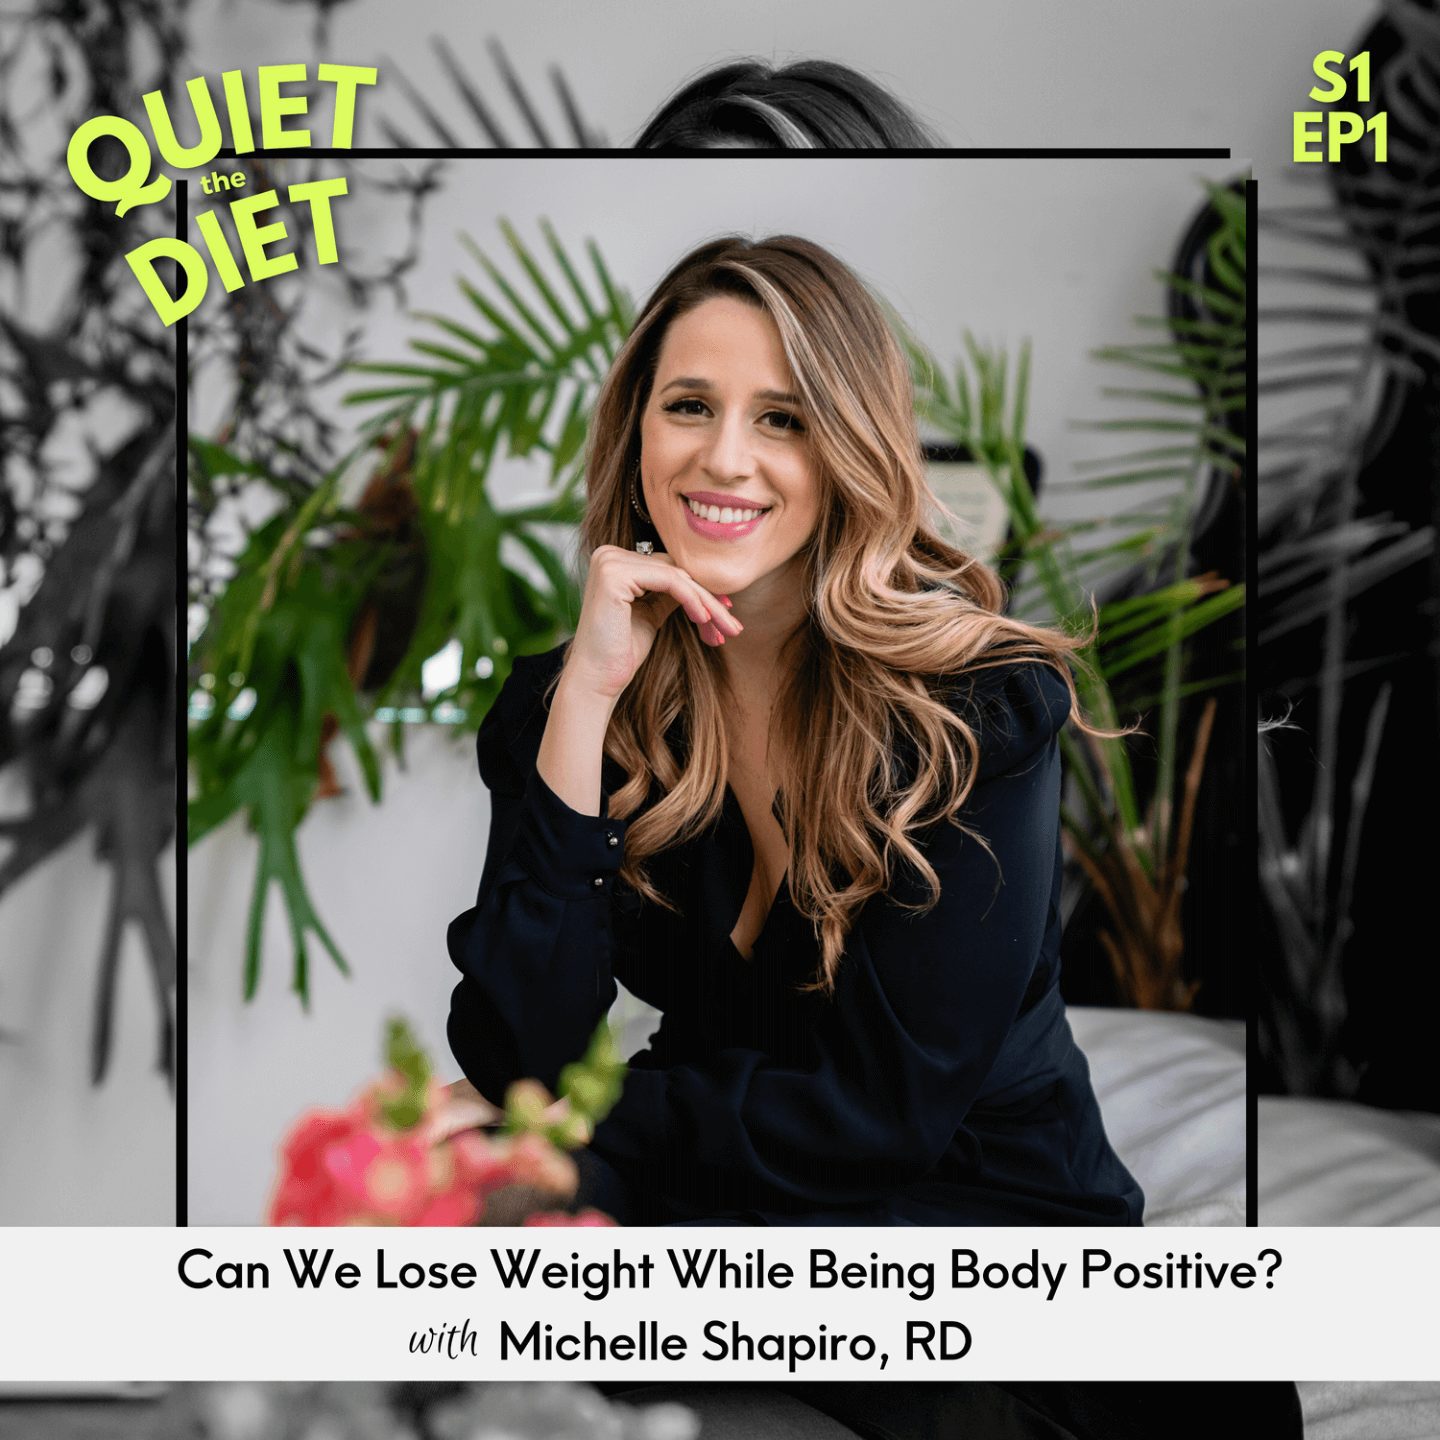 Can we lose weight while being body positive? With Michelle Shapiro RD